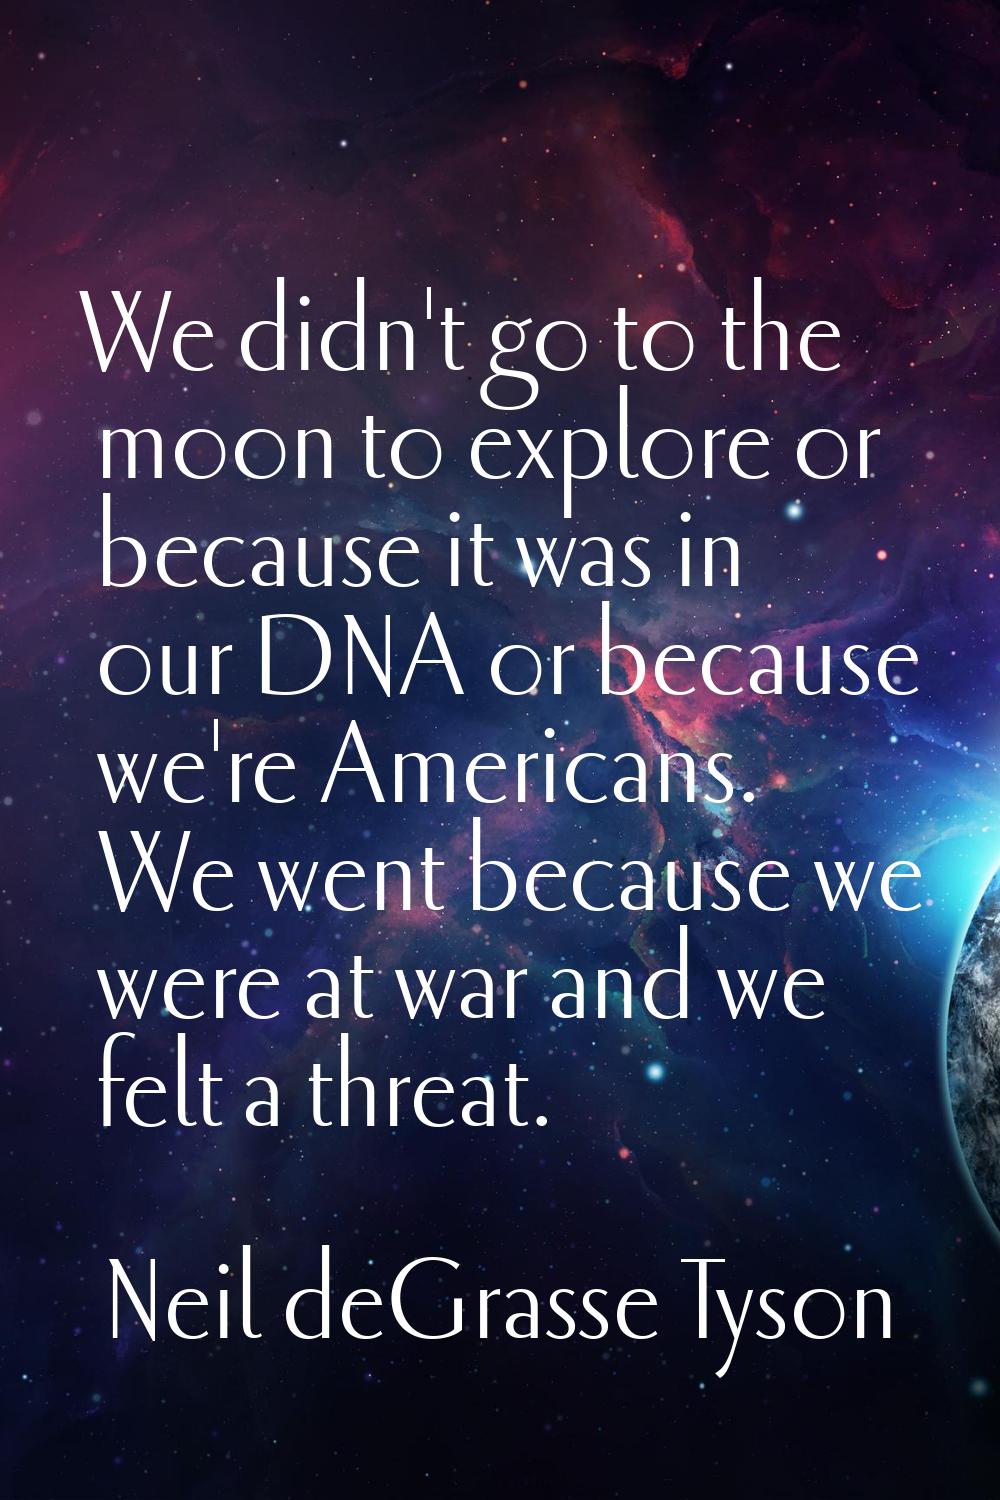 We didn't go to the moon to explore or because it was in our DNA or because we're Americans. We wen